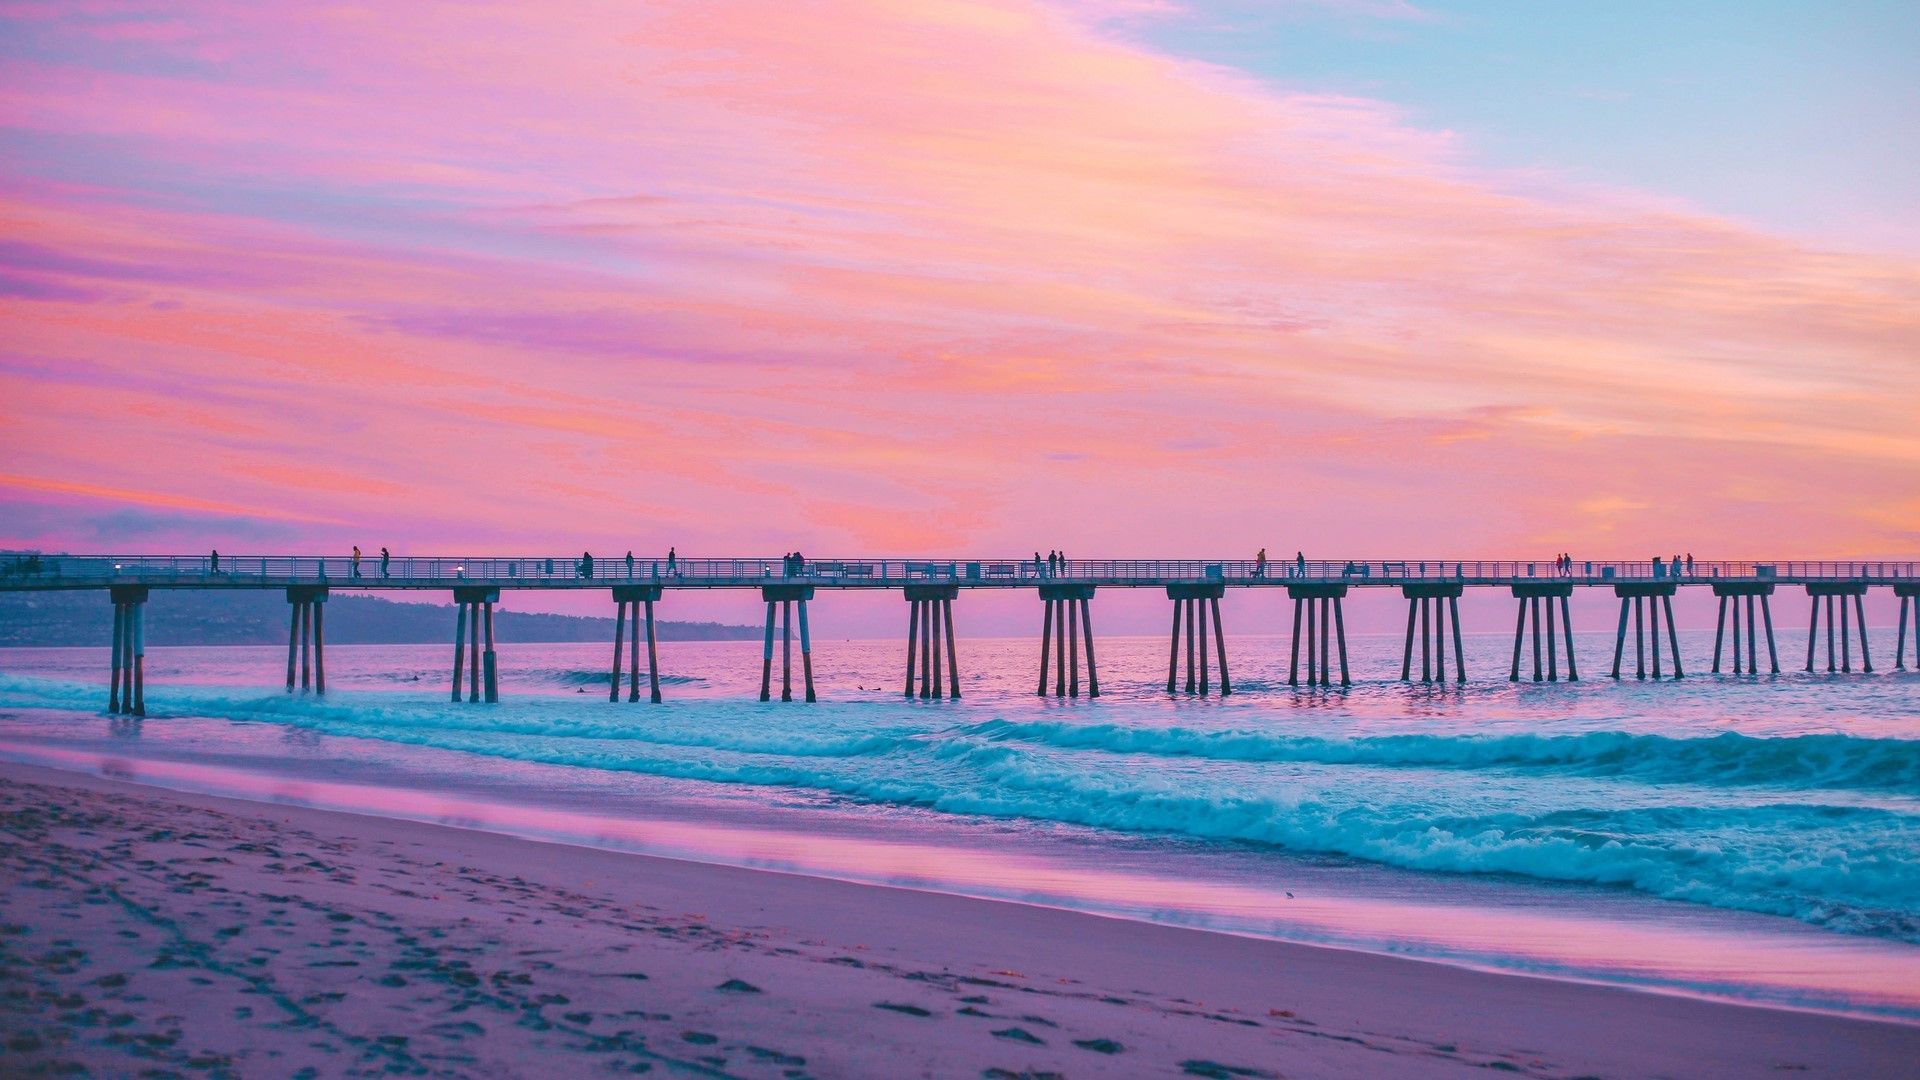 A pier stretches out into the ocean at sunset. - Beach, California